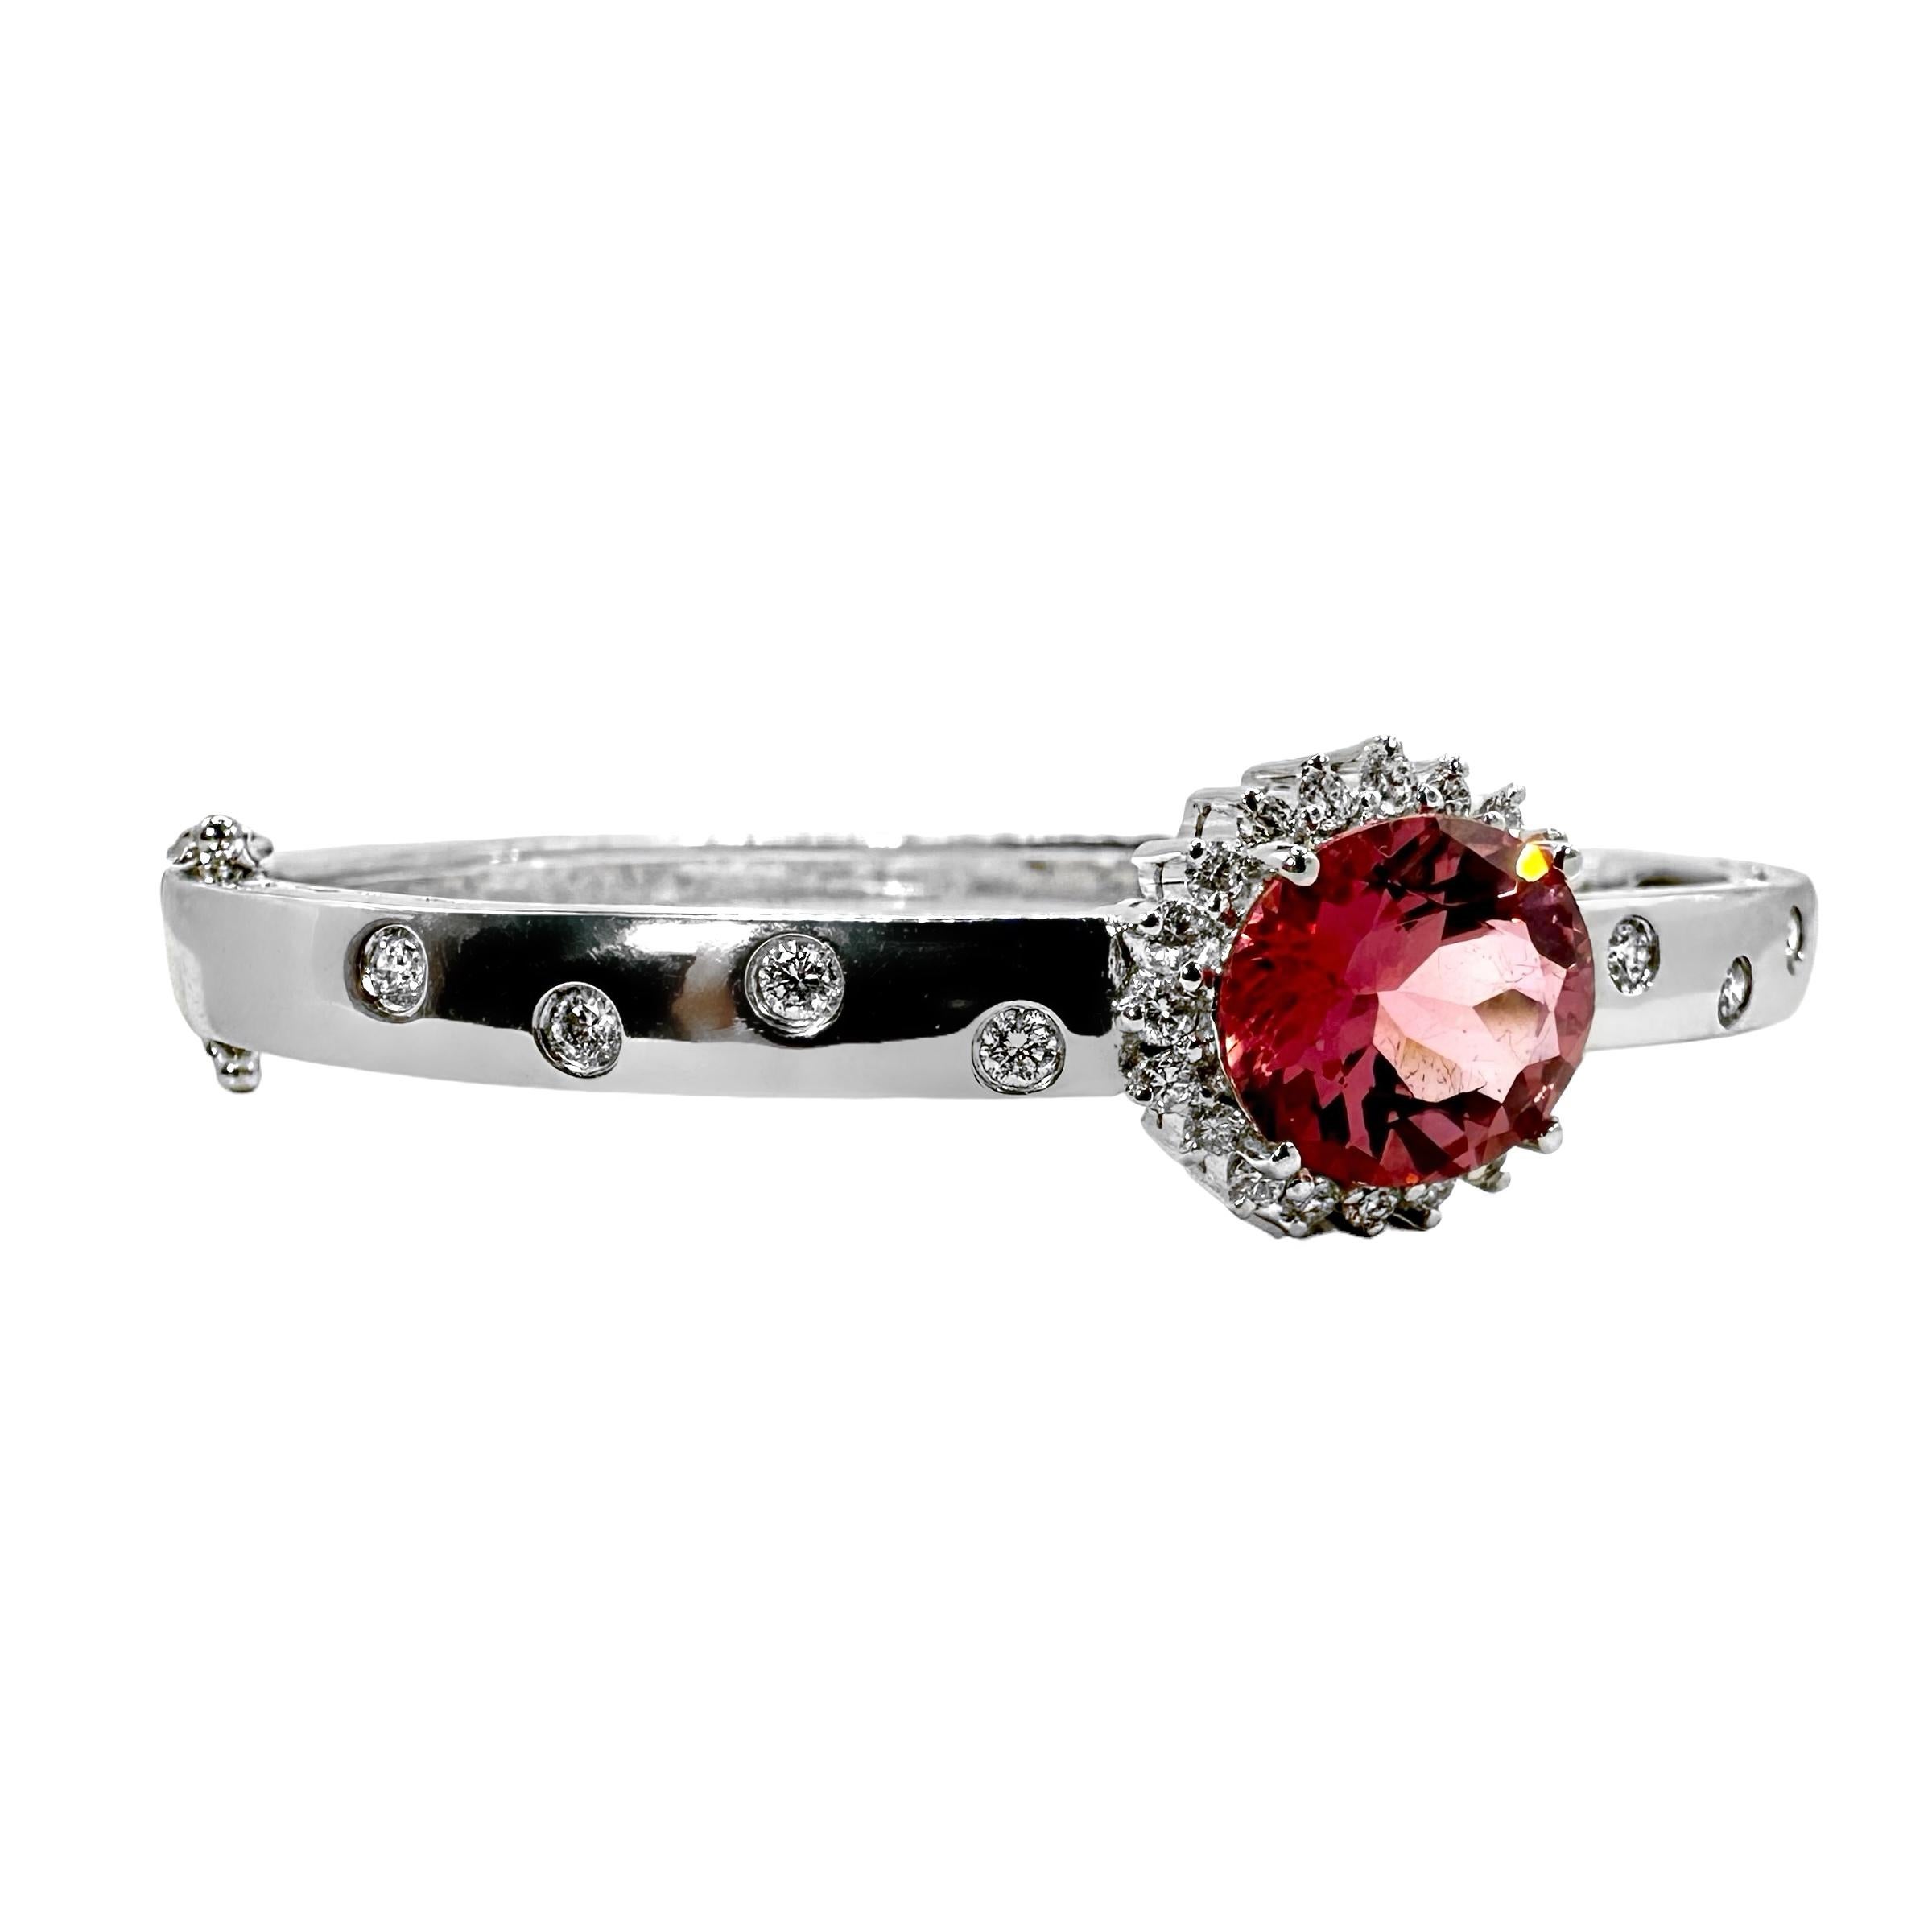 Modern White Gold Bangle Bracelet with 4.27ct Oval Pink Tourmaline and Diamond Halo For Sale